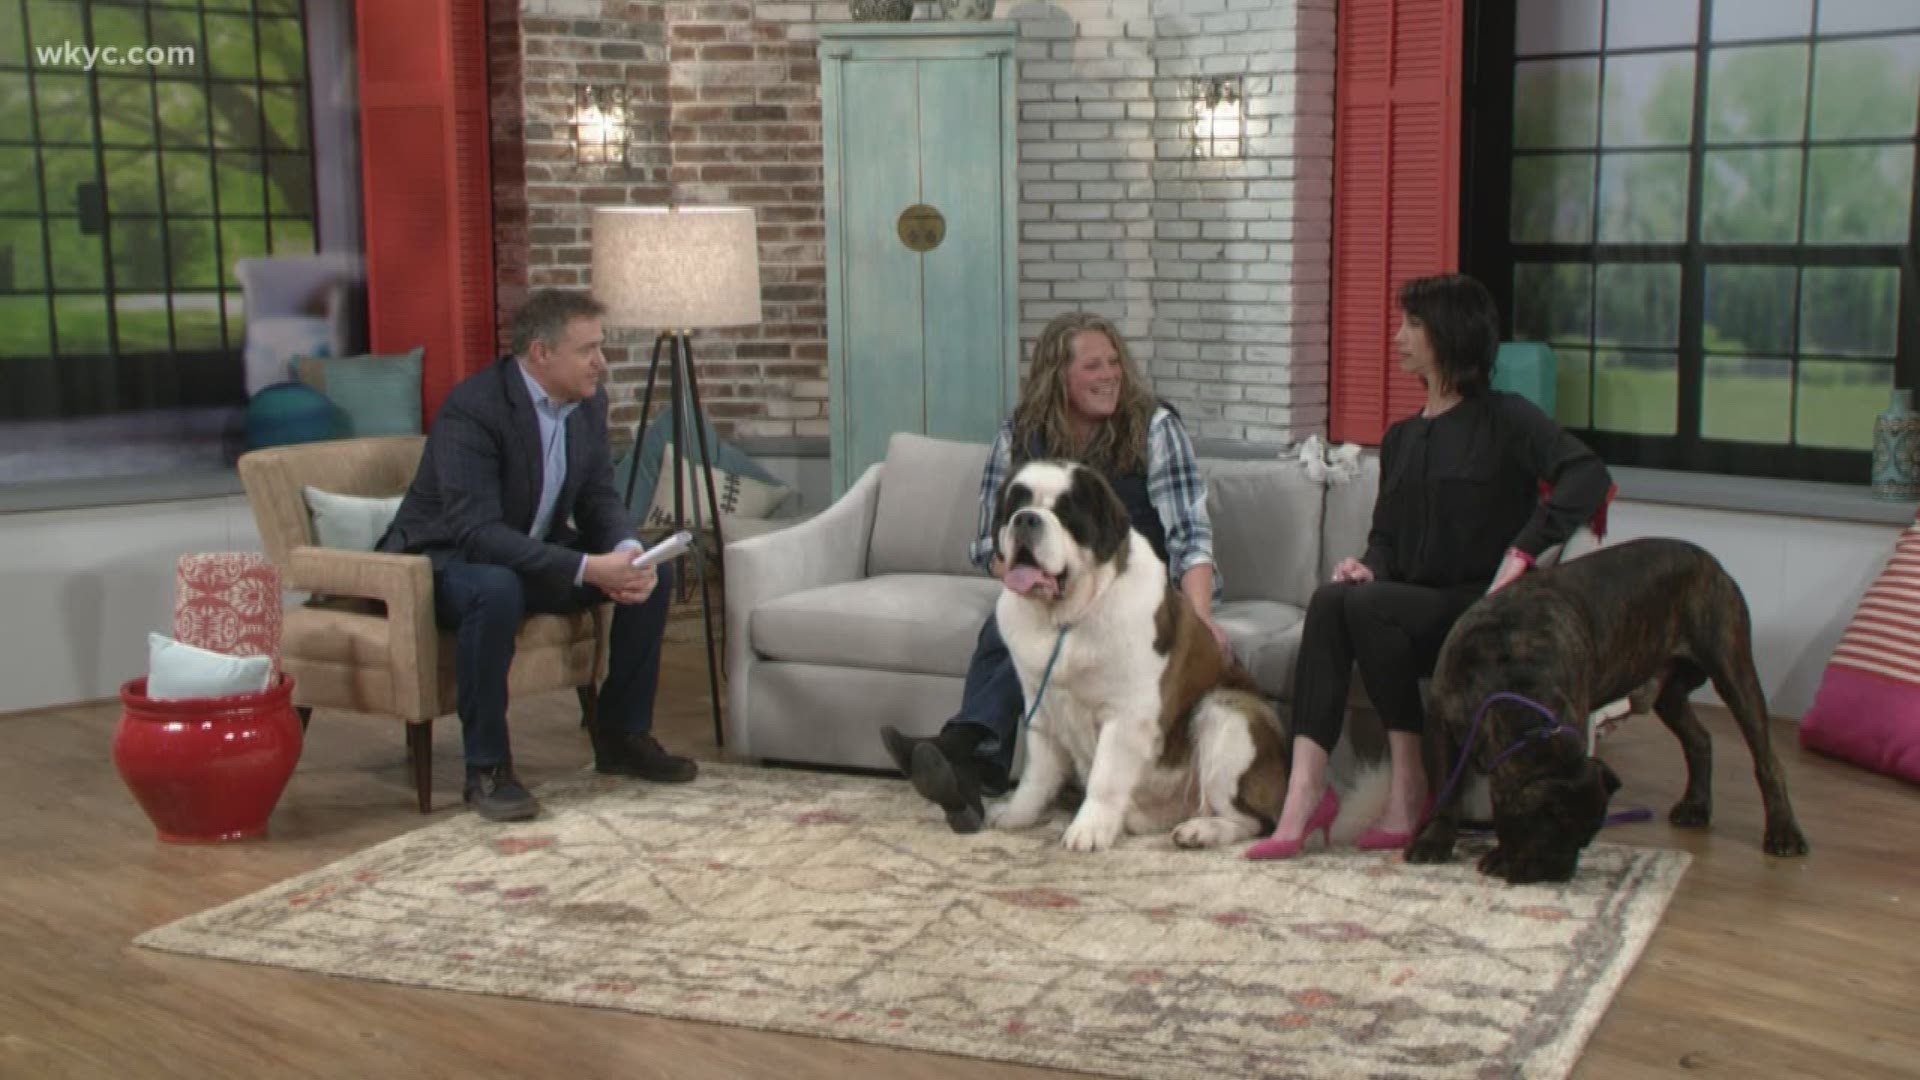 Canton woman had two dogs participate in West Minister Dog show. The dogs and their handler,Sandy visit Jay and Betsy on What's New.